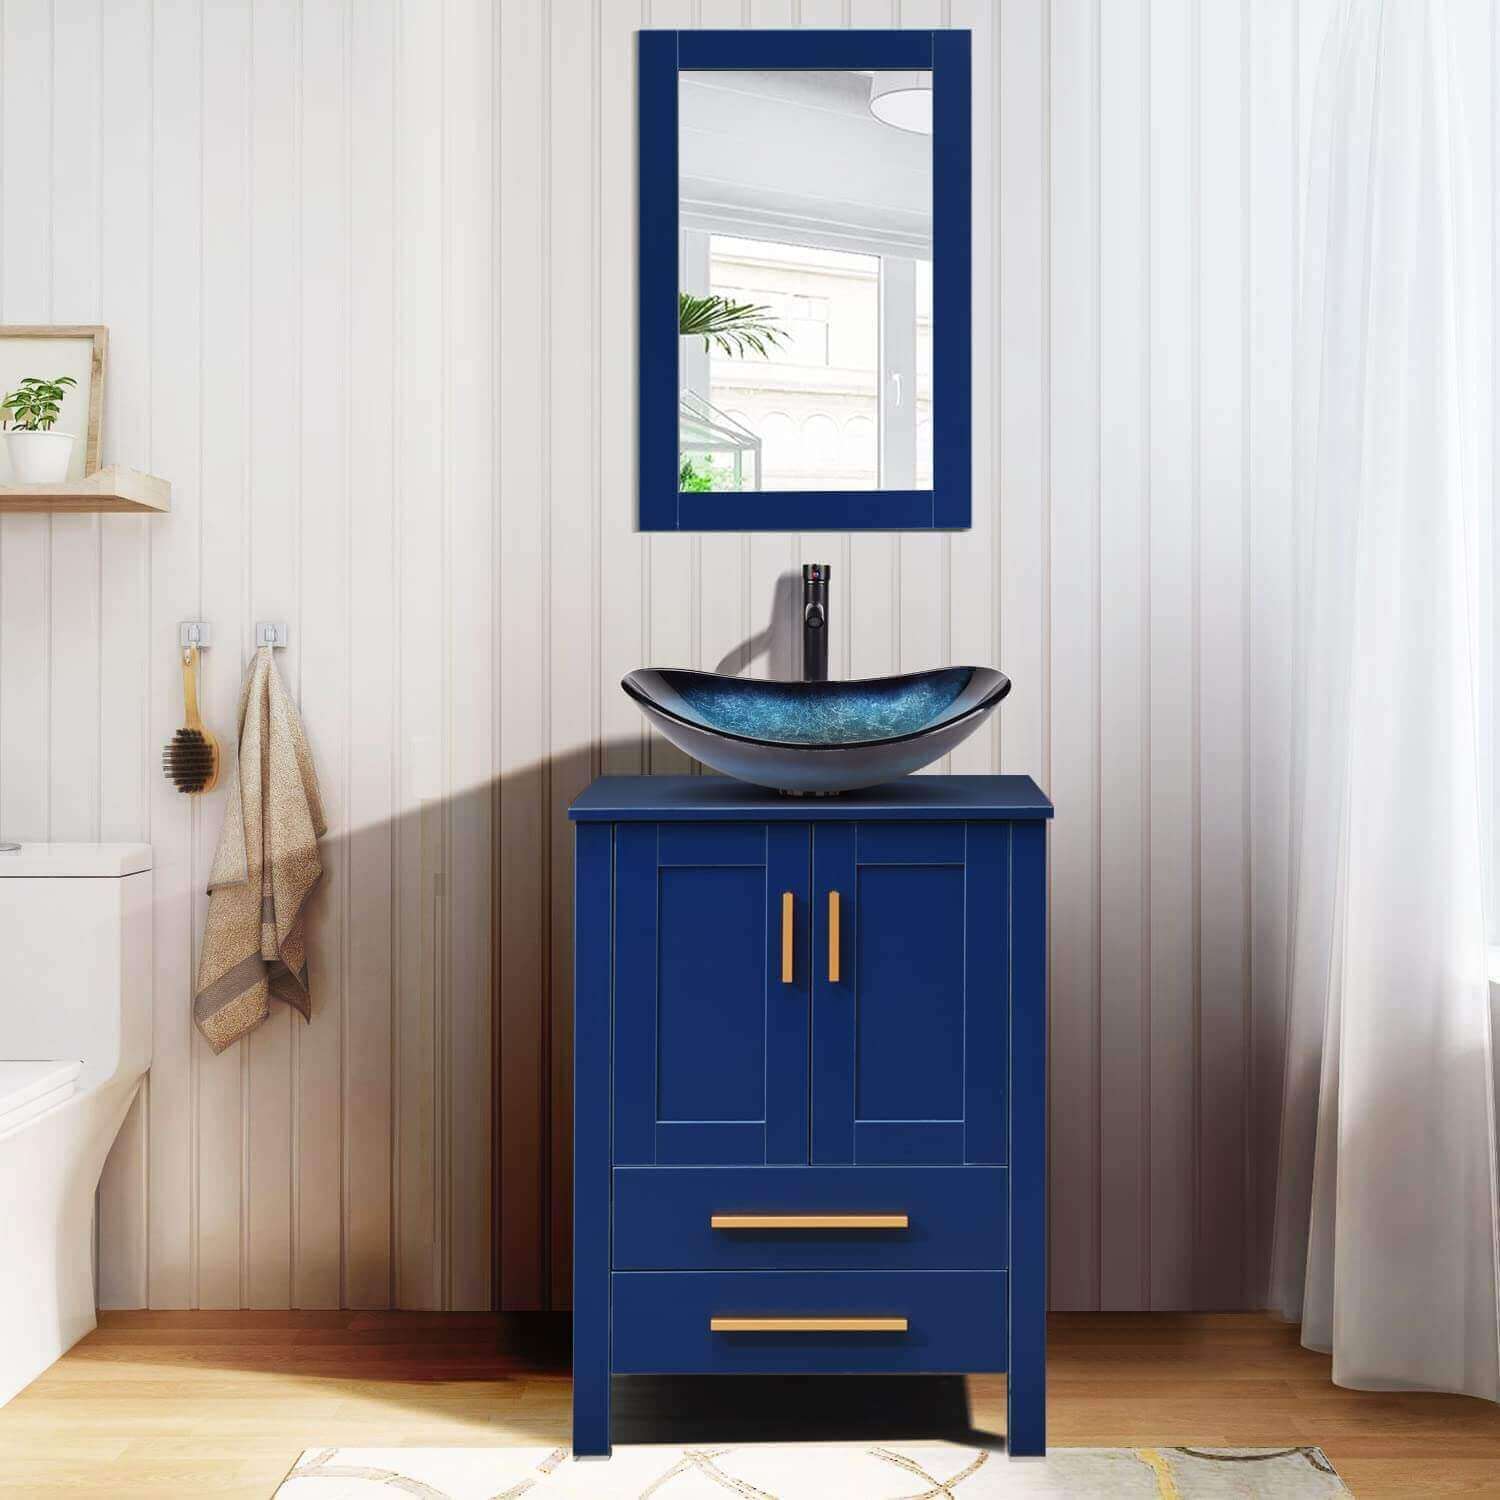 Elecwish 24-Inch bathroom wood vanity with blue boat sink set stand pedestal cabinet with mirror